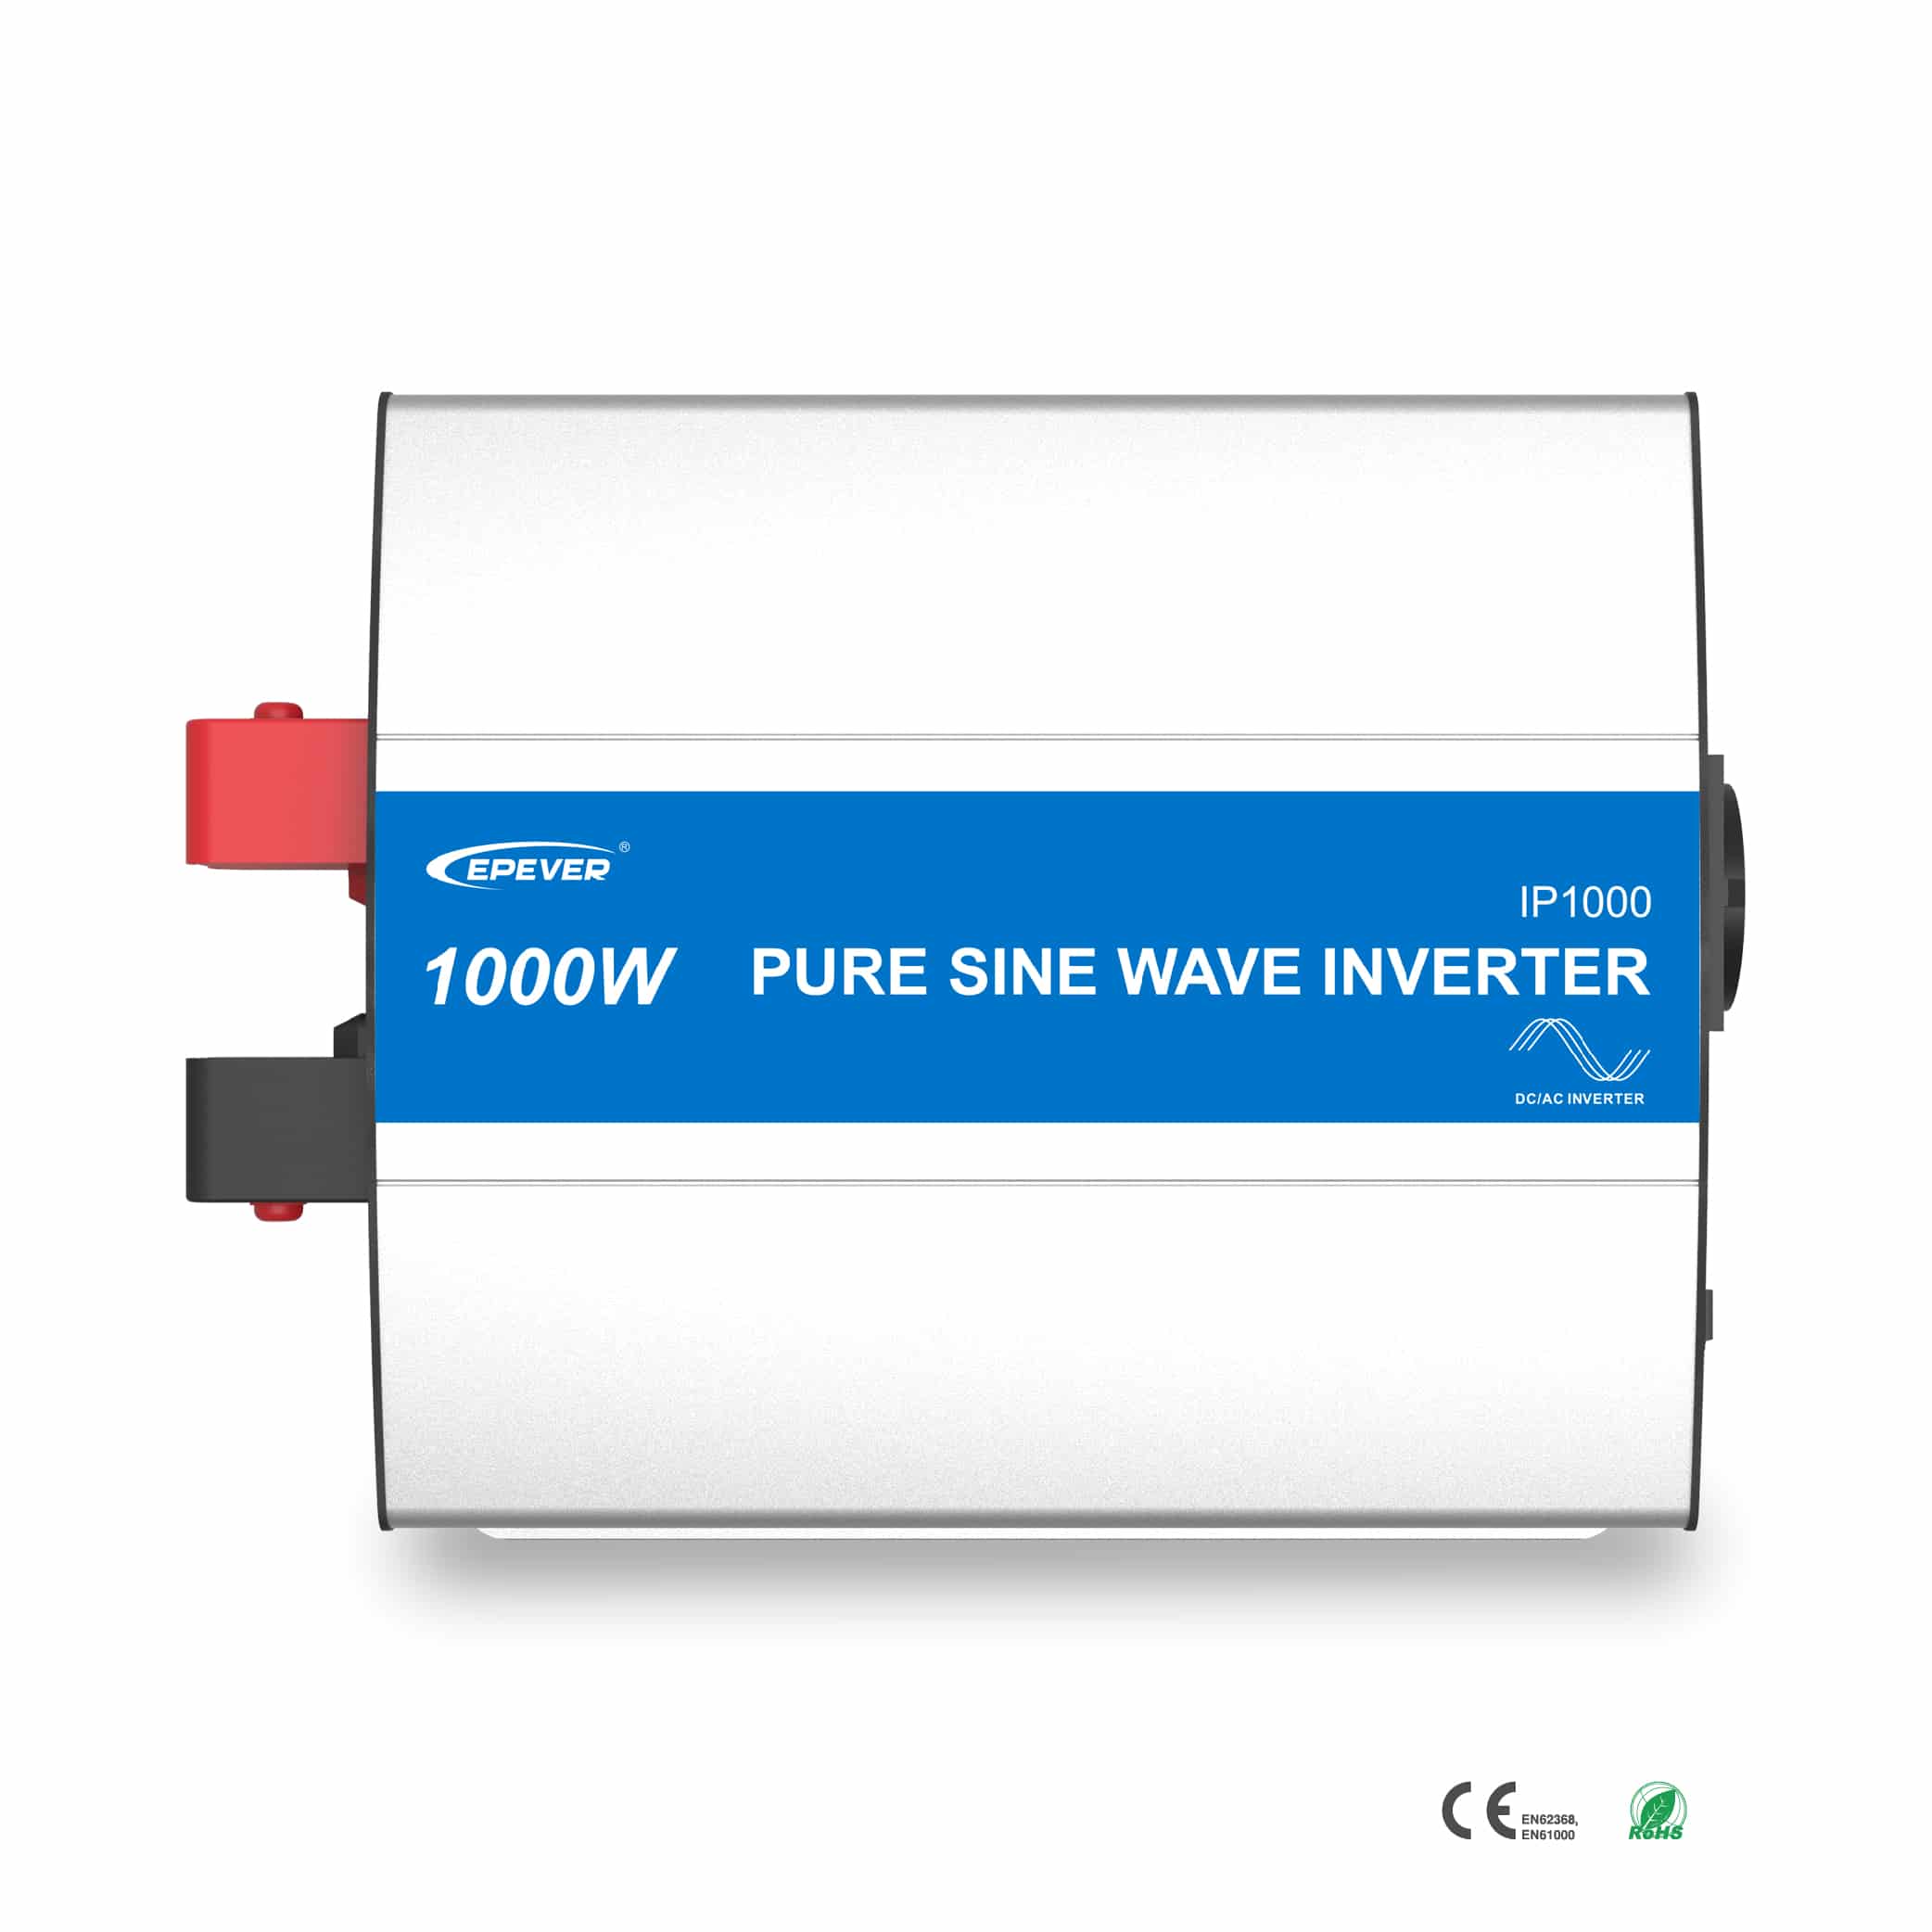 IPower 110/120VAC (350~2000W) Pure Sine Wave Inverter - EPEVER